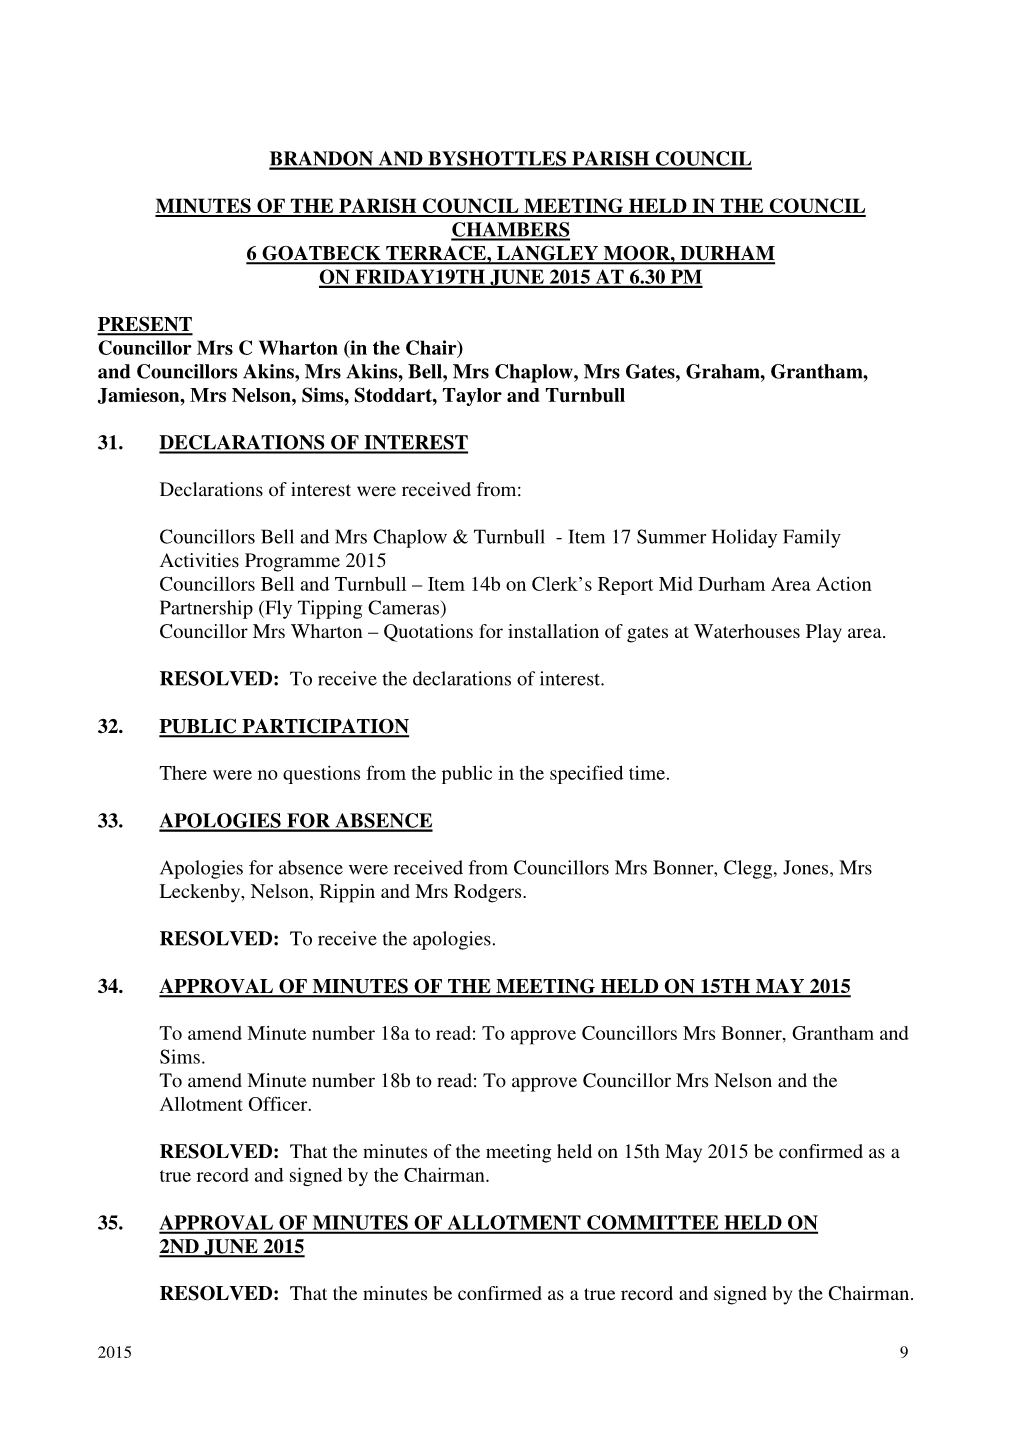 Brandon and Byshottles Parish Council Minutes Of